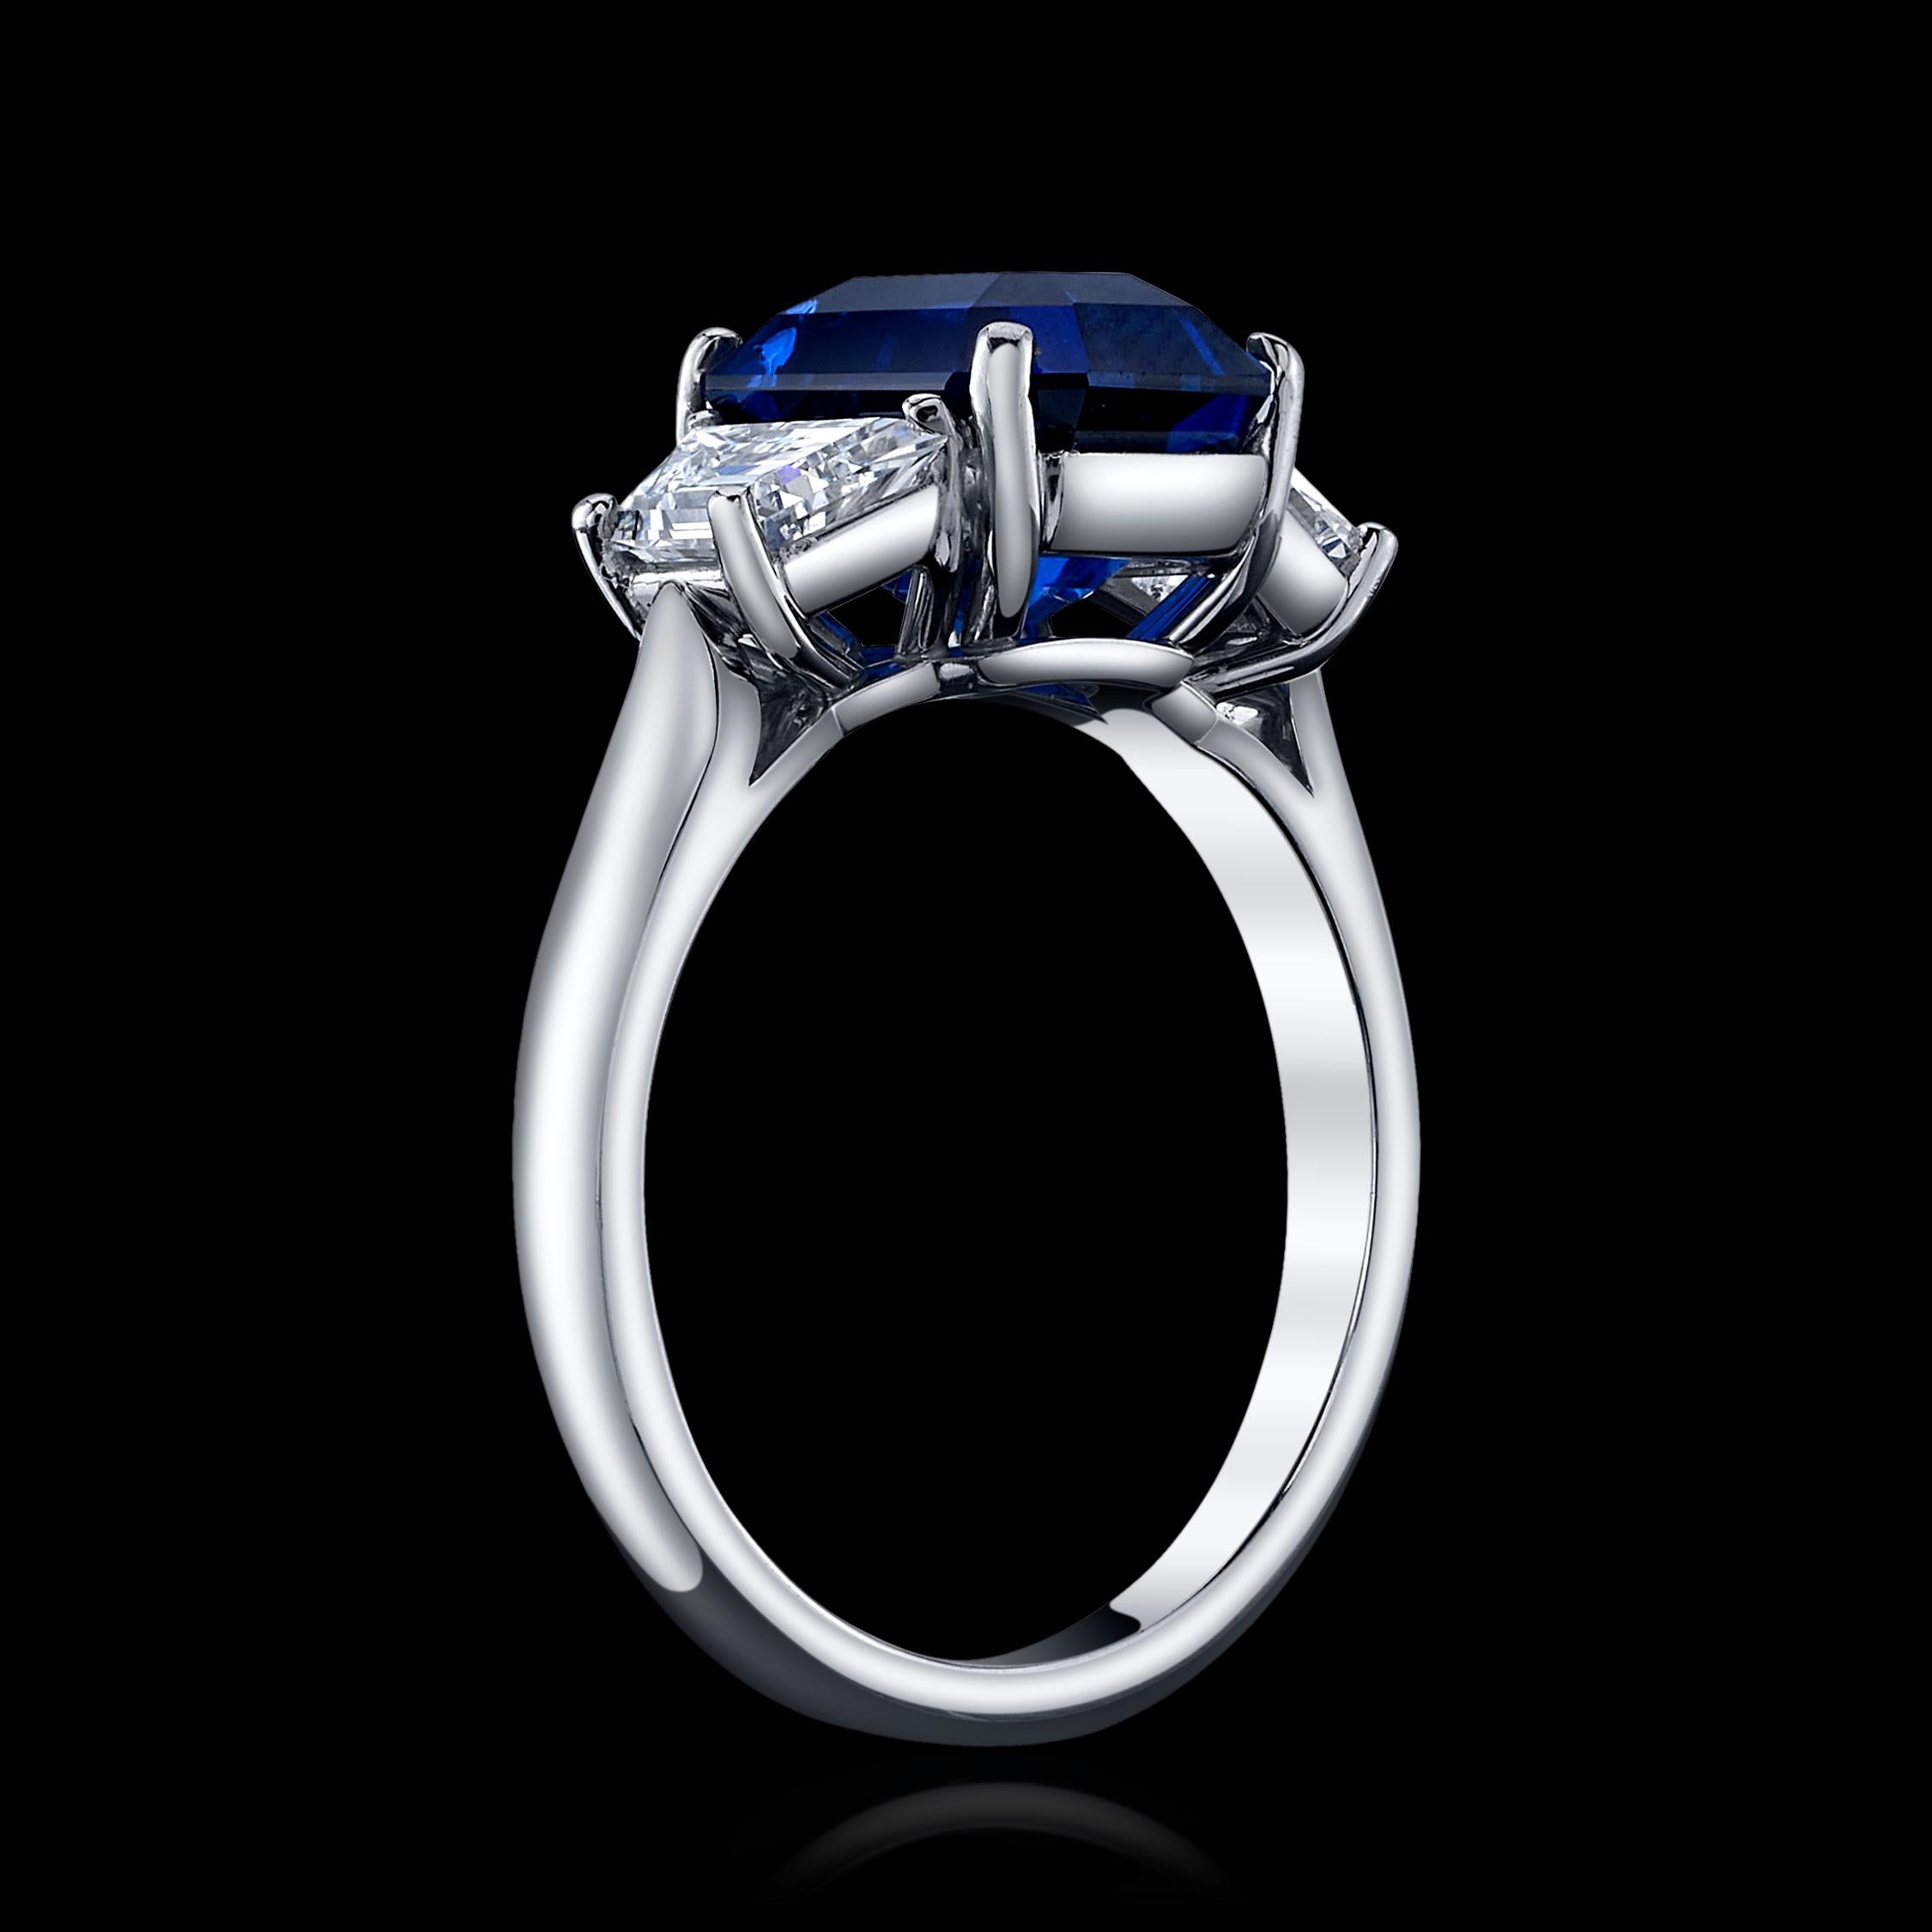 4.70ct Radiant Blue Sapphire set in platinum with 2 side trapezoid diamonds = 0.73cttw
CDC #1911271
